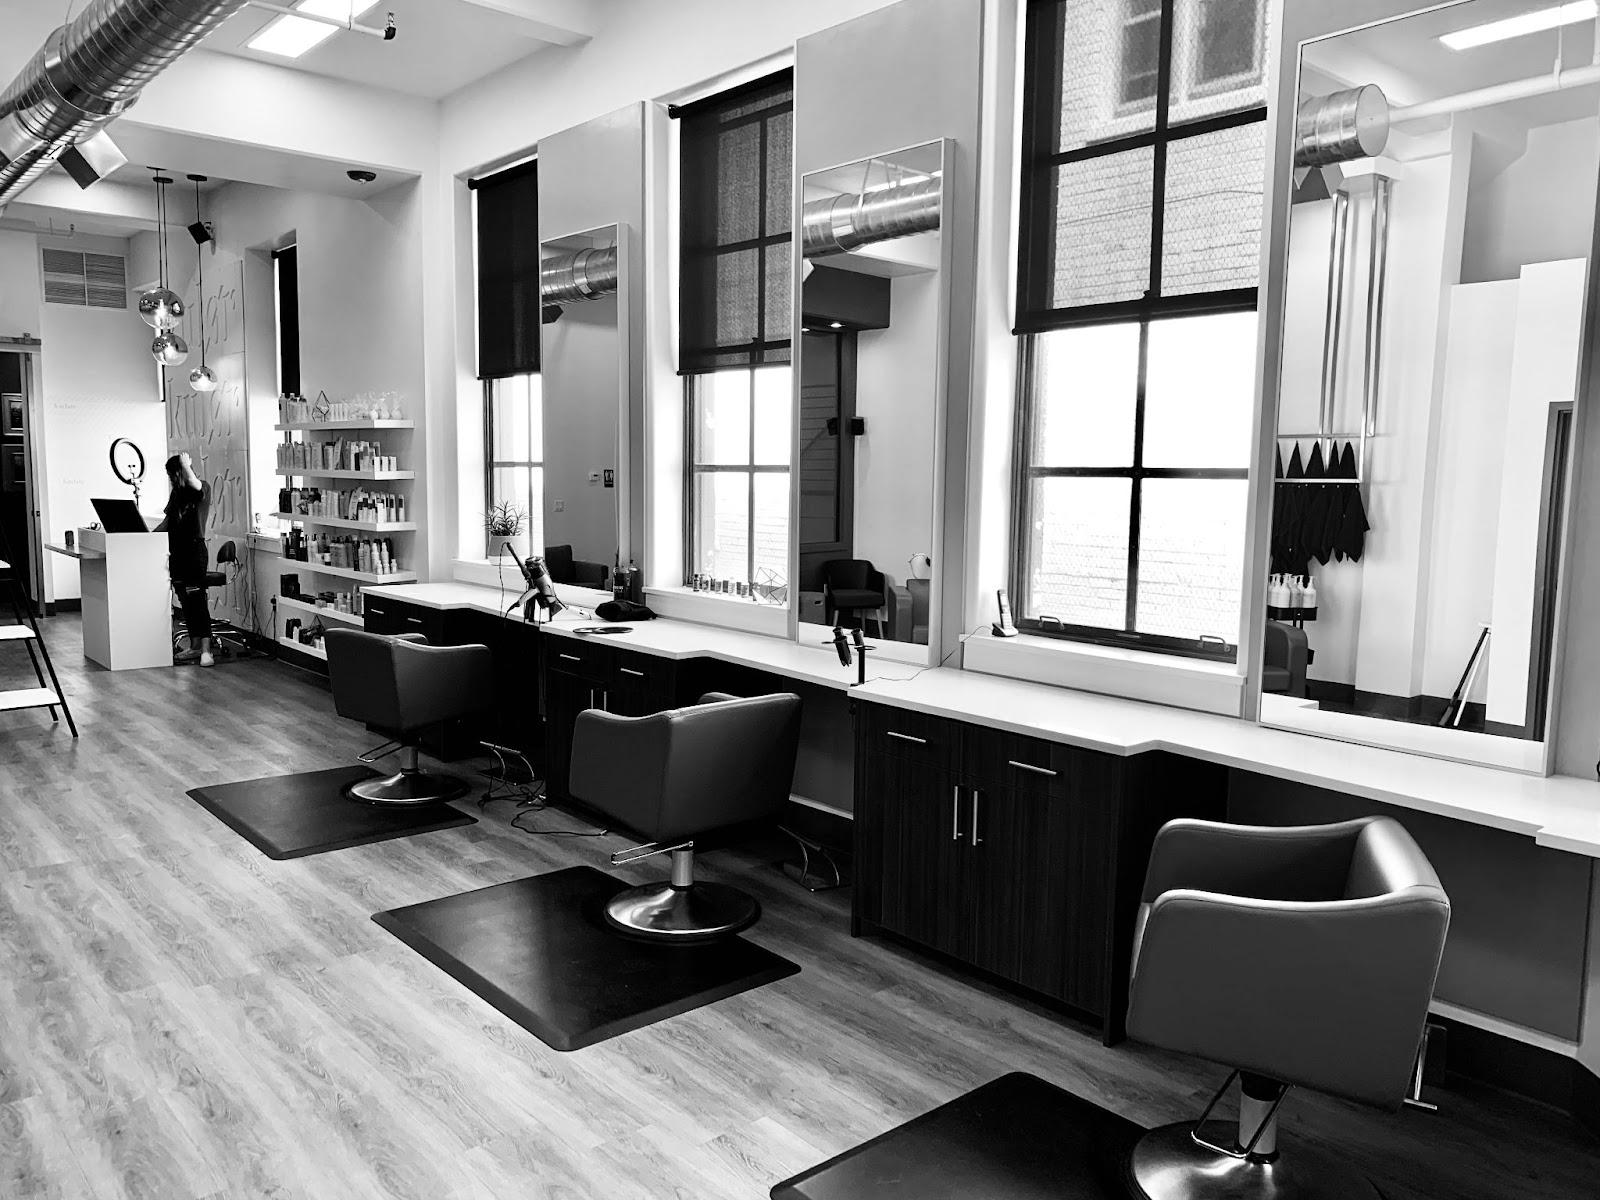 Find Your Ideal Hairstyle in Denver: Top Salons Revealed